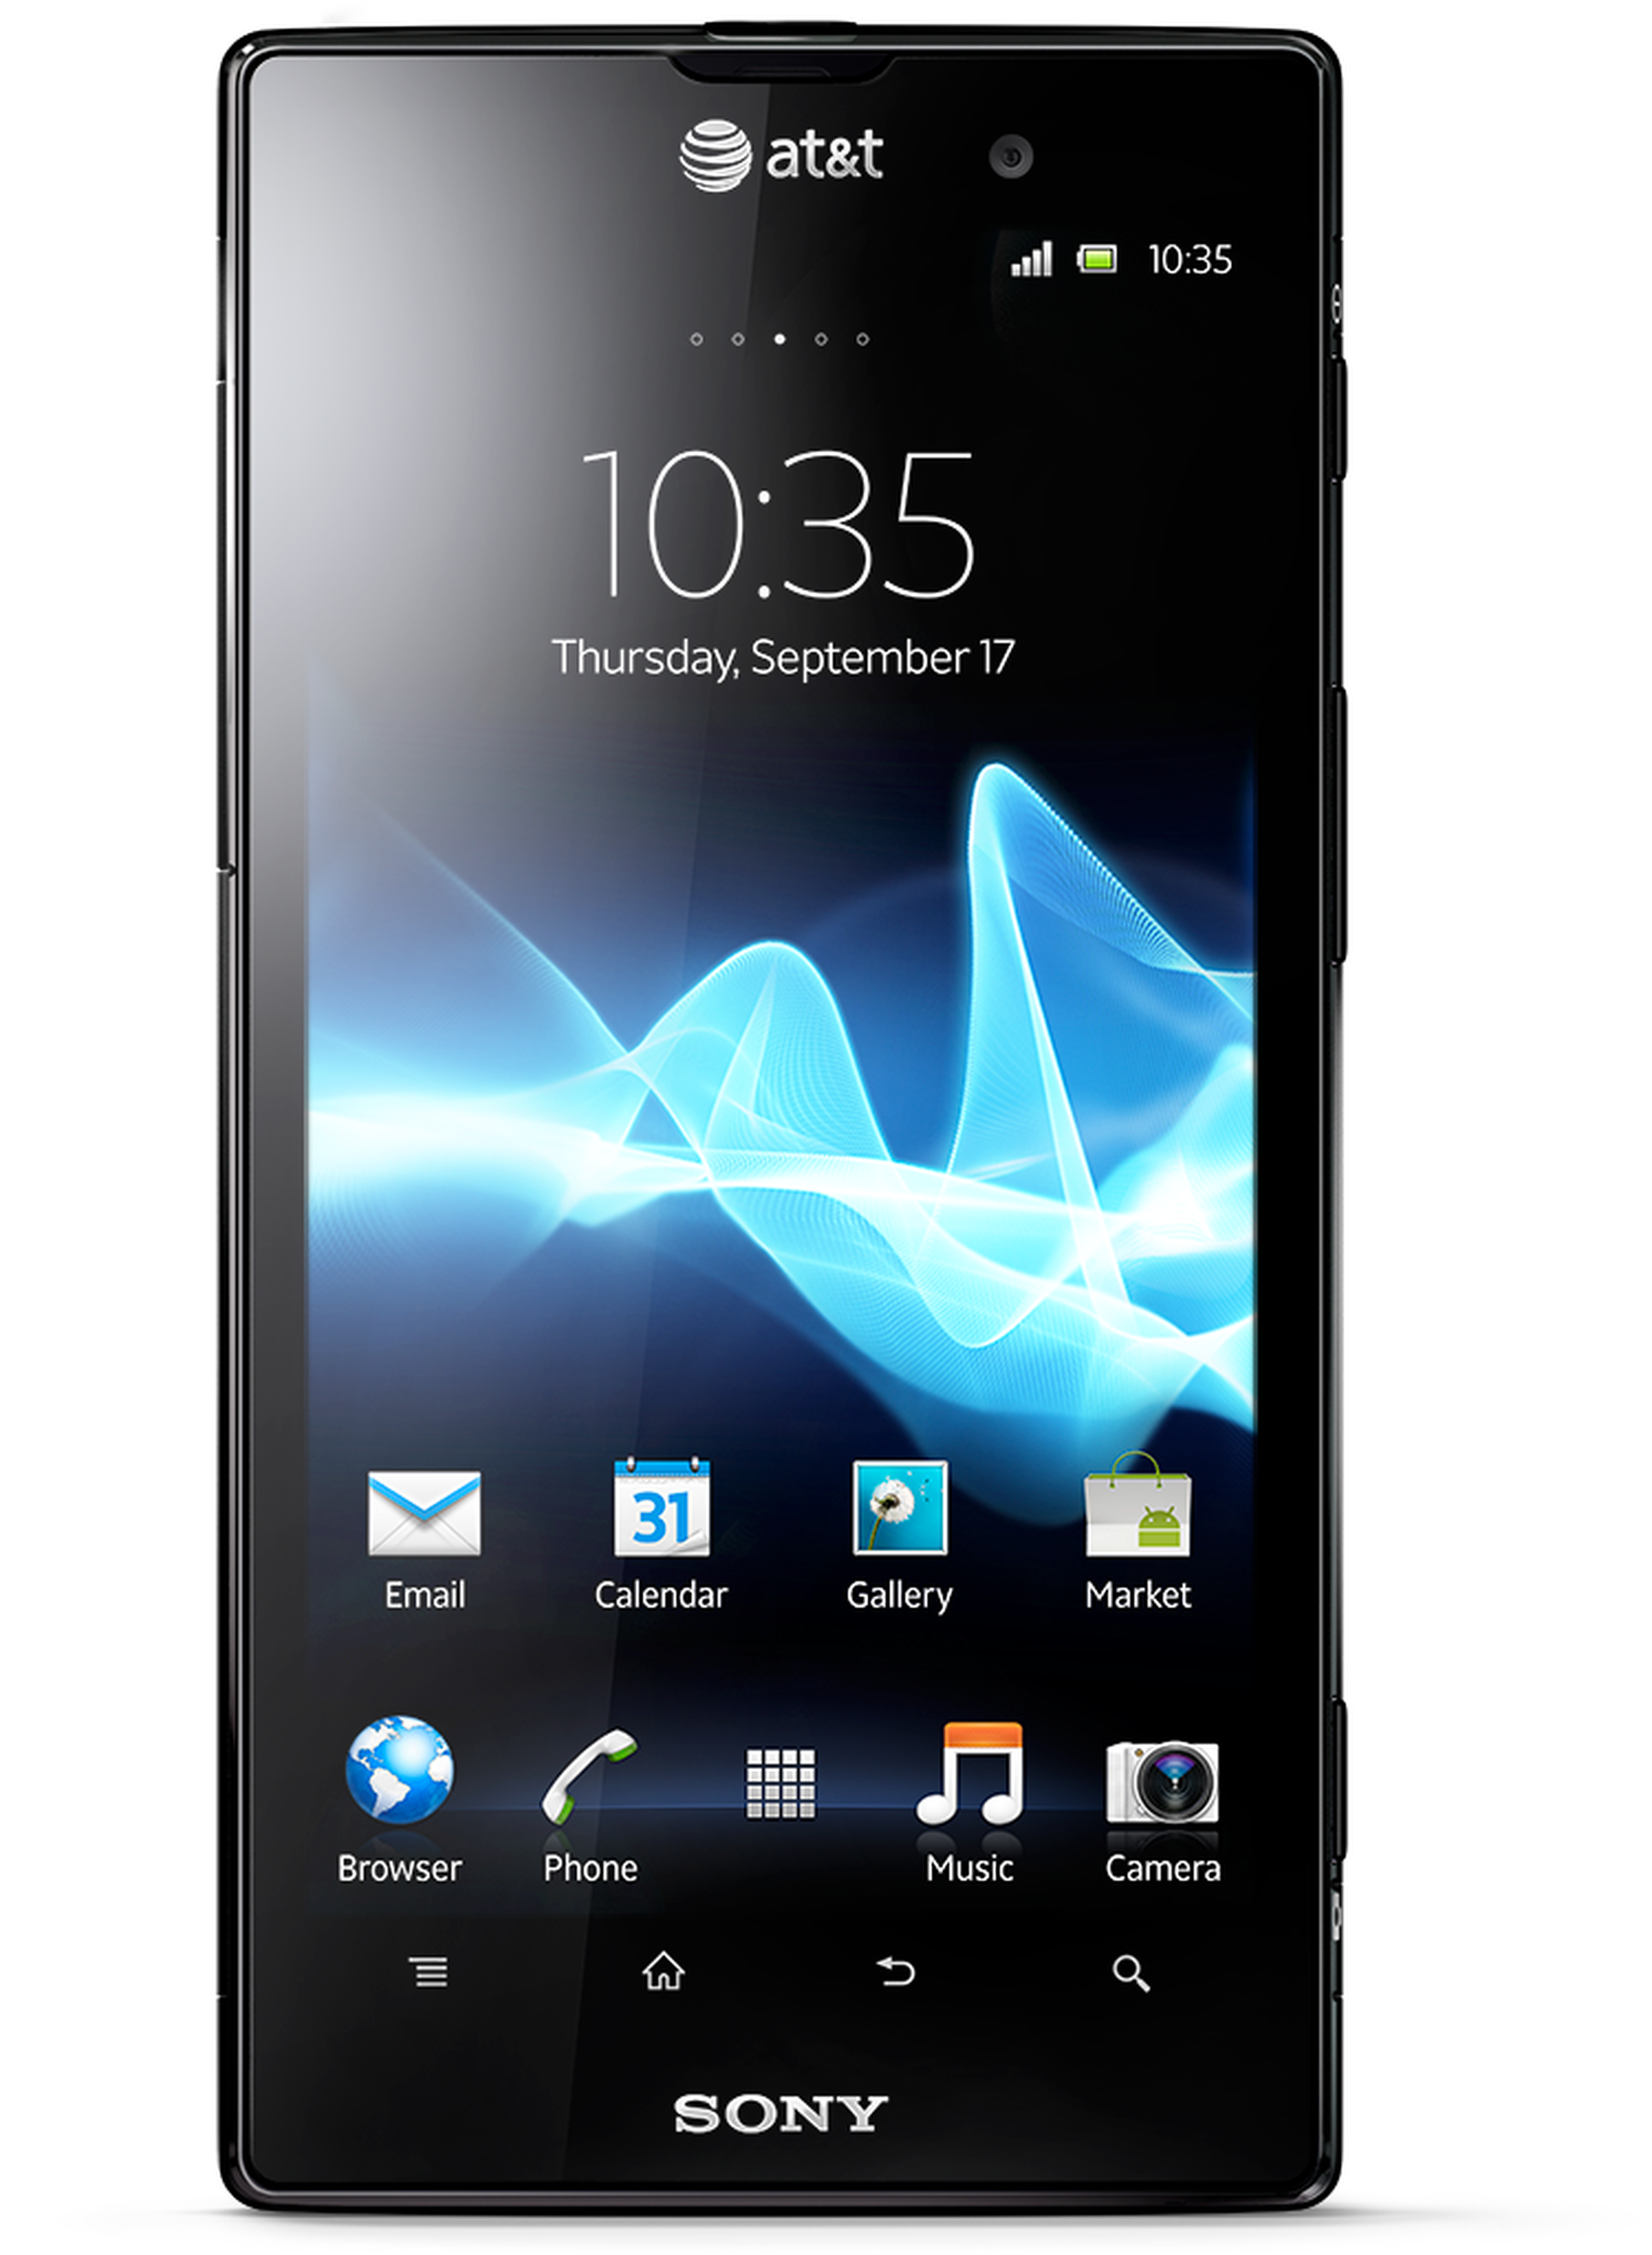 Sony Xperia Ion press pictures